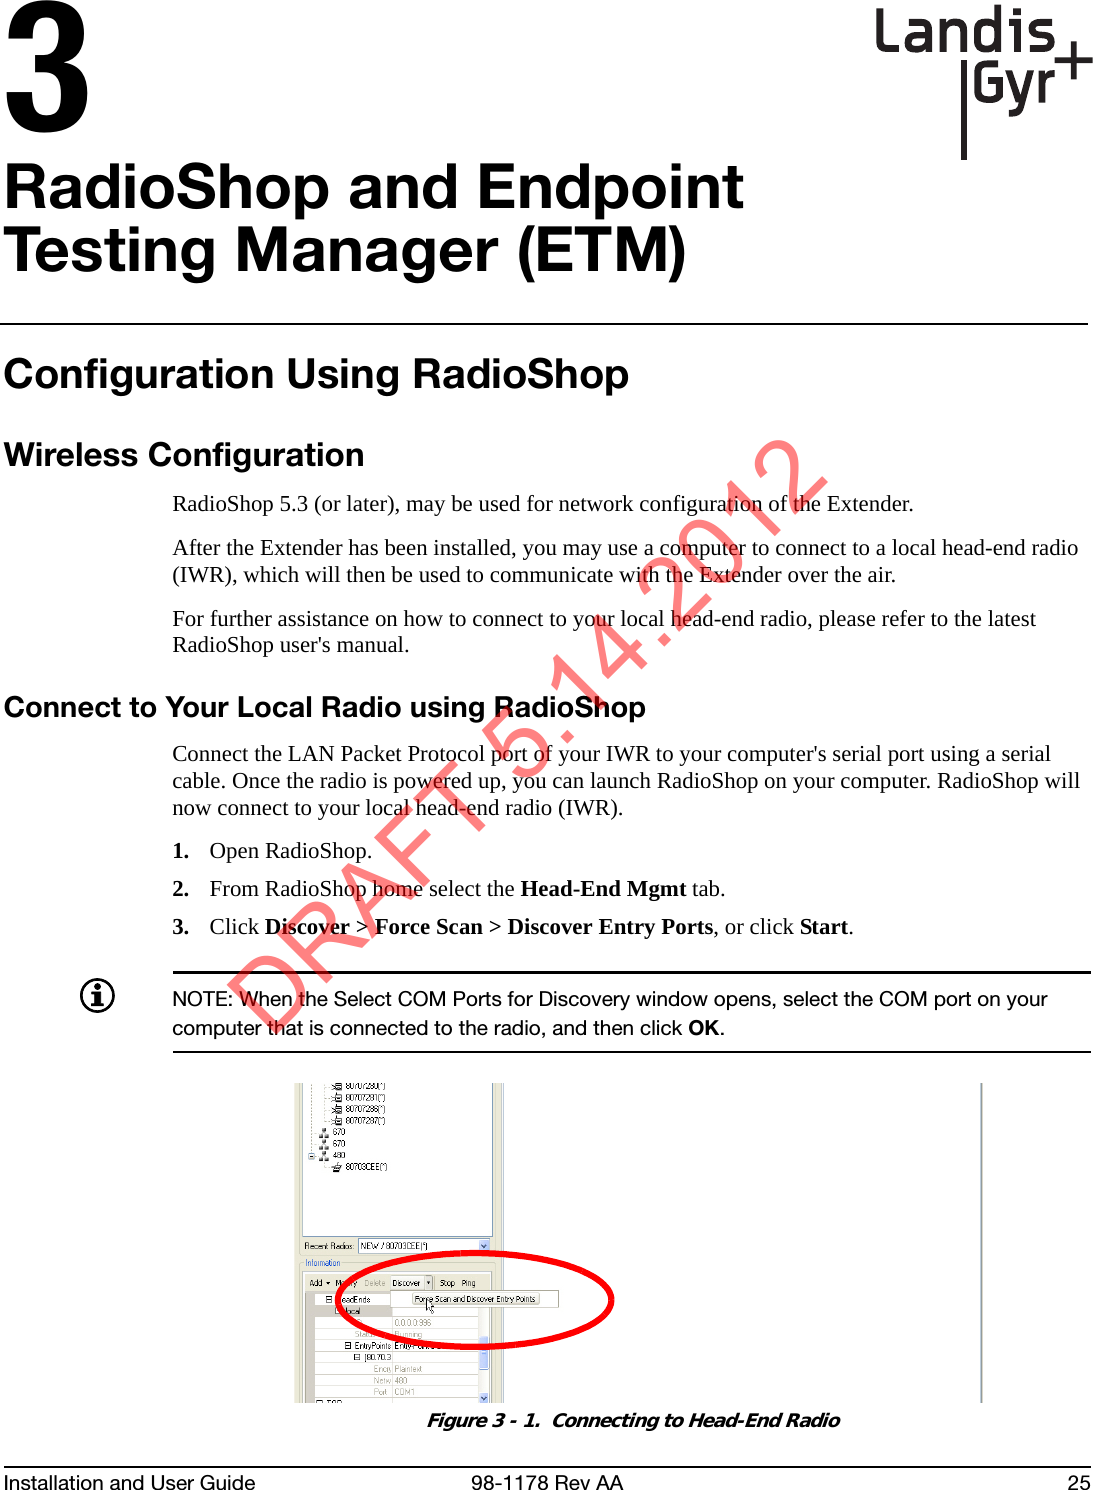 Installation and User Guide 98-1178 Rev AA 253RadioShop and Endpoint Testing Manager (ETM)Configuration Using RadioShopWireless ConfigurationRadioShop 5.3 (or later), may be used for network configuration of the Extender. After the Extender has been installed, you may use a computer to connect to a local head-end radio (IWR), which will then be used to communicate with the Extender over the air. For further assistance on how to connect to your local head-end radio, please refer to the latest RadioShop user&apos;s manual.Connect to Your Local Radio using RadioShopConnect the LAN Packet Protocol port of your IWR to your computer&apos;s serial port using a serial cable. Once the radio is powered up, you can launch RadioShop on your computer. RadioShop will now connect to your local head-end radio (IWR).1. Open RadioShop.2. From RadioShop home select the Head-End Mgmt tab.3. Click Discover &gt; Force Scan &gt; Discover Entry Ports, or click Start.NOTE: When the Select COM Ports for Discovery window opens, select the COM port on your computer that is connected to the radio, and then click OK.Figure 3 - 1.  Connecting to Head-End RadioDRAFT 5.14.2012